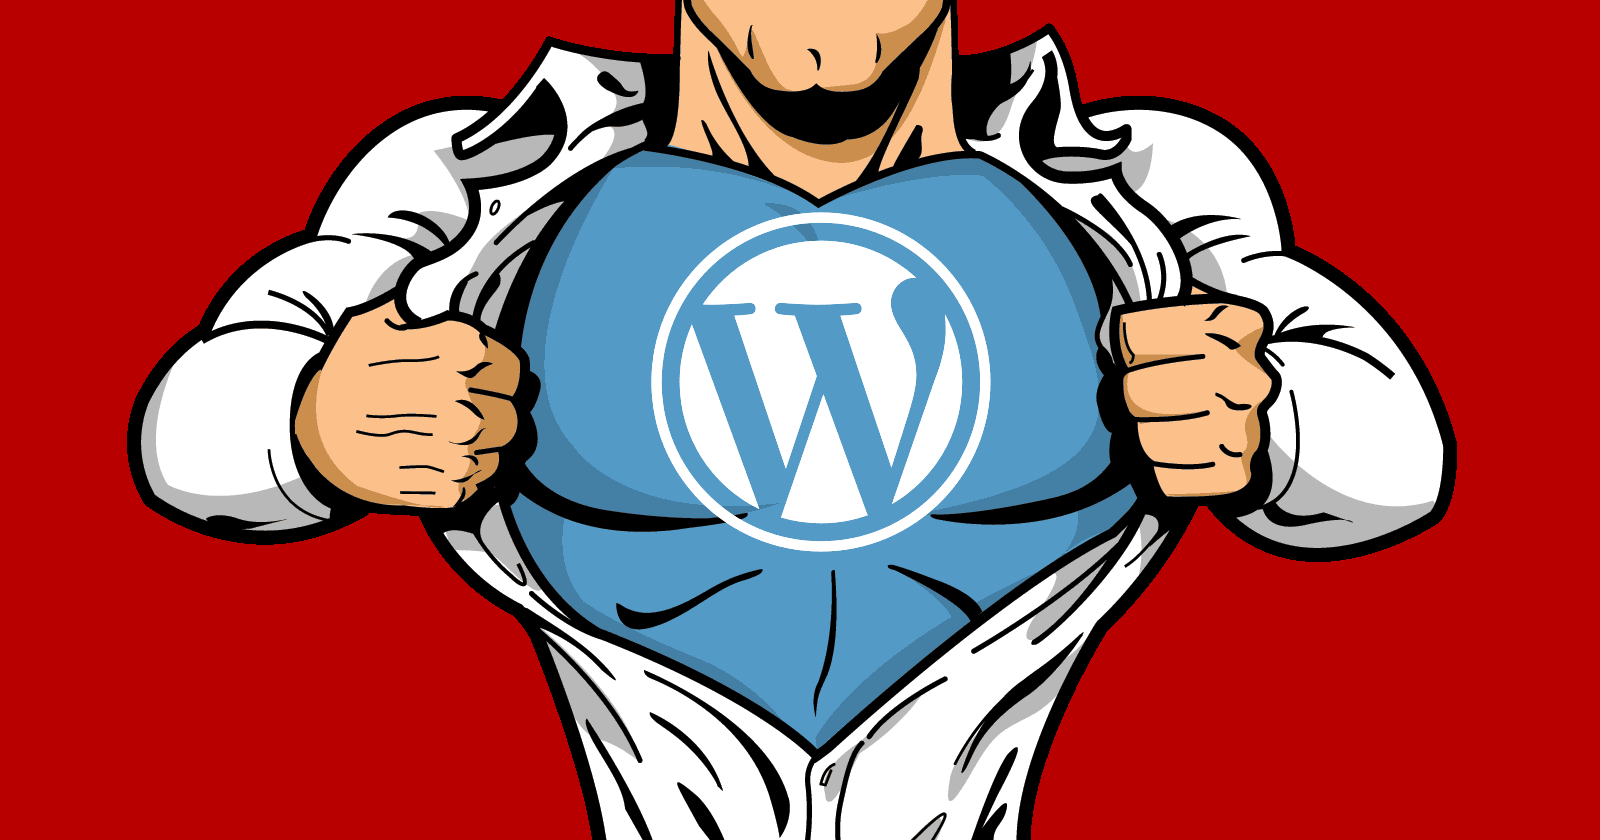 Image of a superhero opening his shirt to reveal a blue suit with the WordPress logo